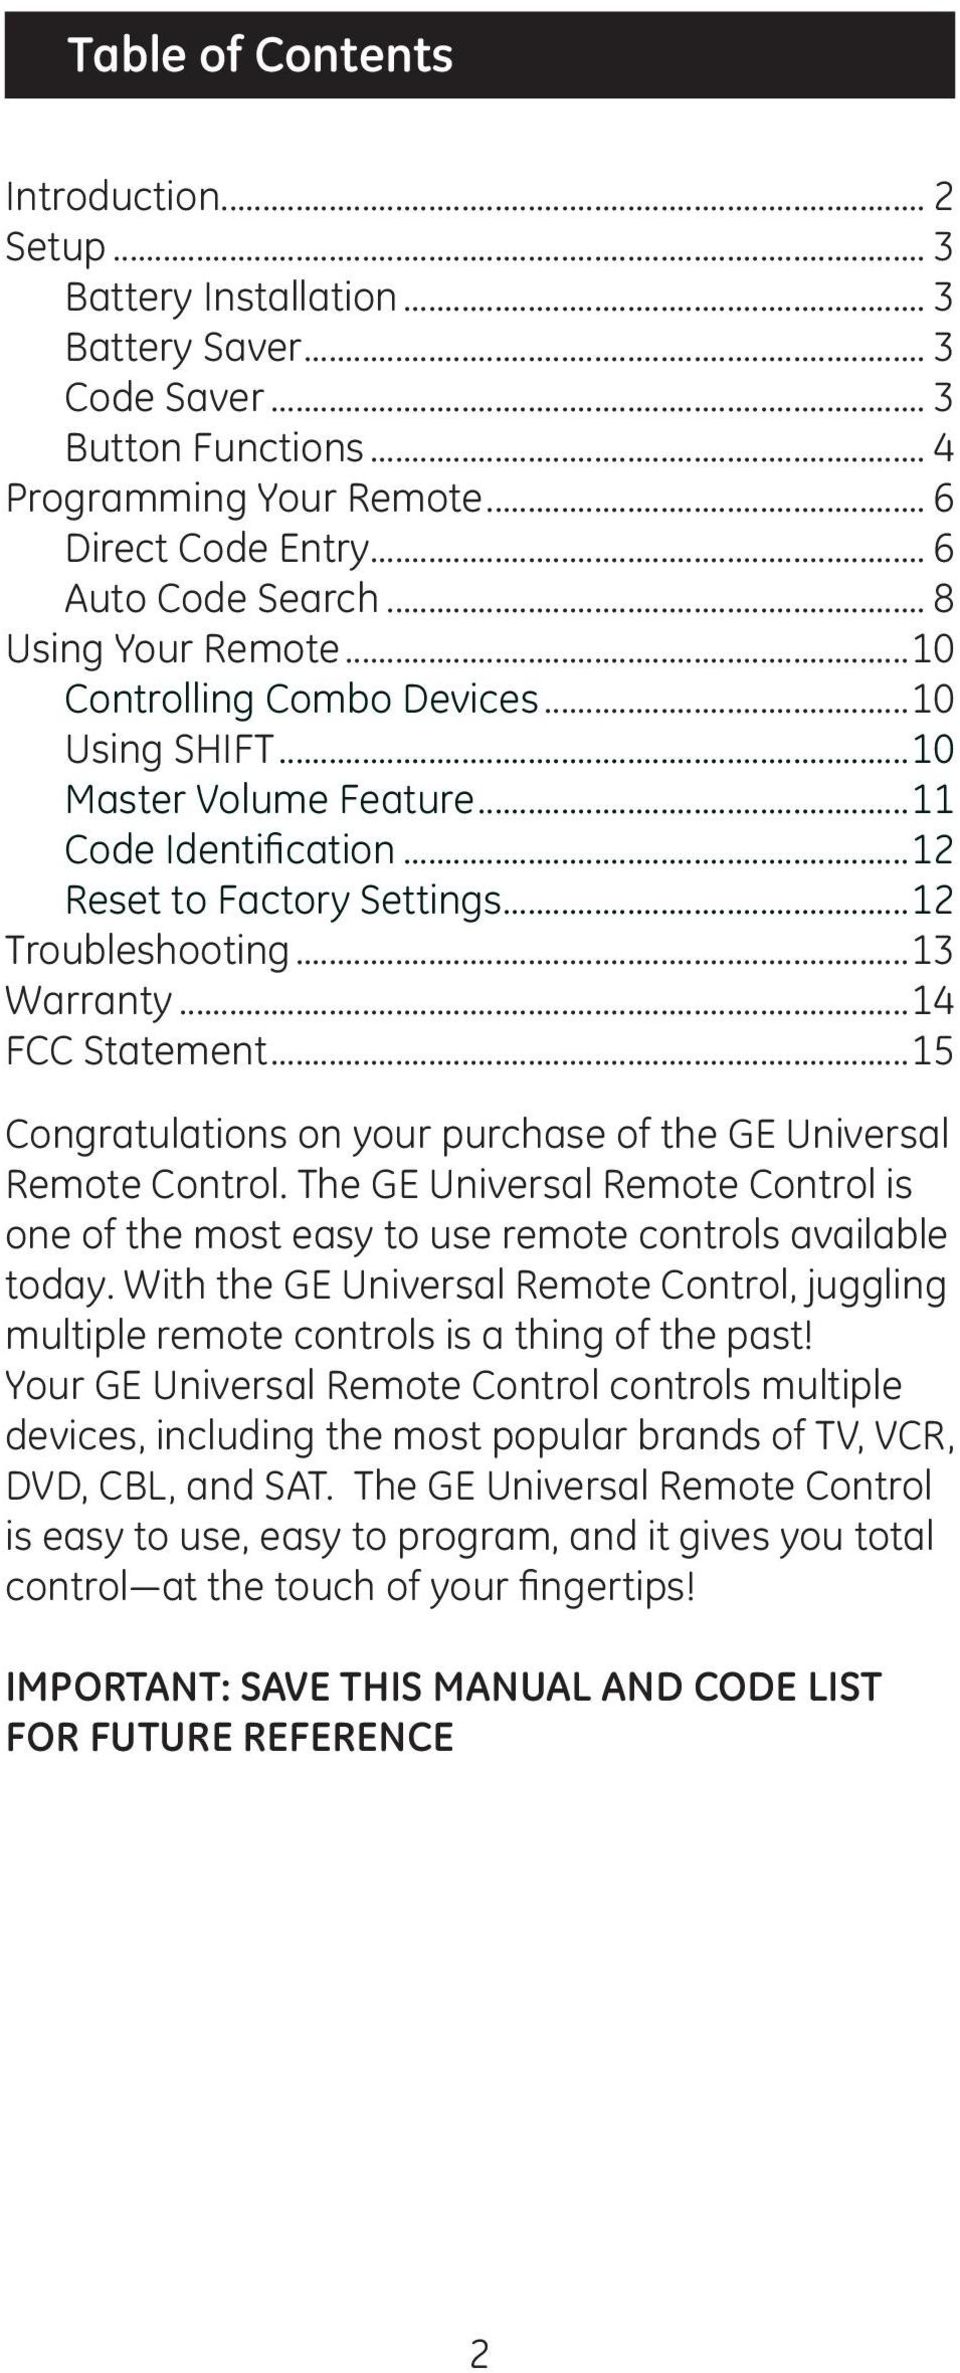 ..14 FCC Statement...15 Congratulations on your purchase of the GE Universal Remote Control. The GE Universal Remote Control is one of the most easy to use remote controls available today.